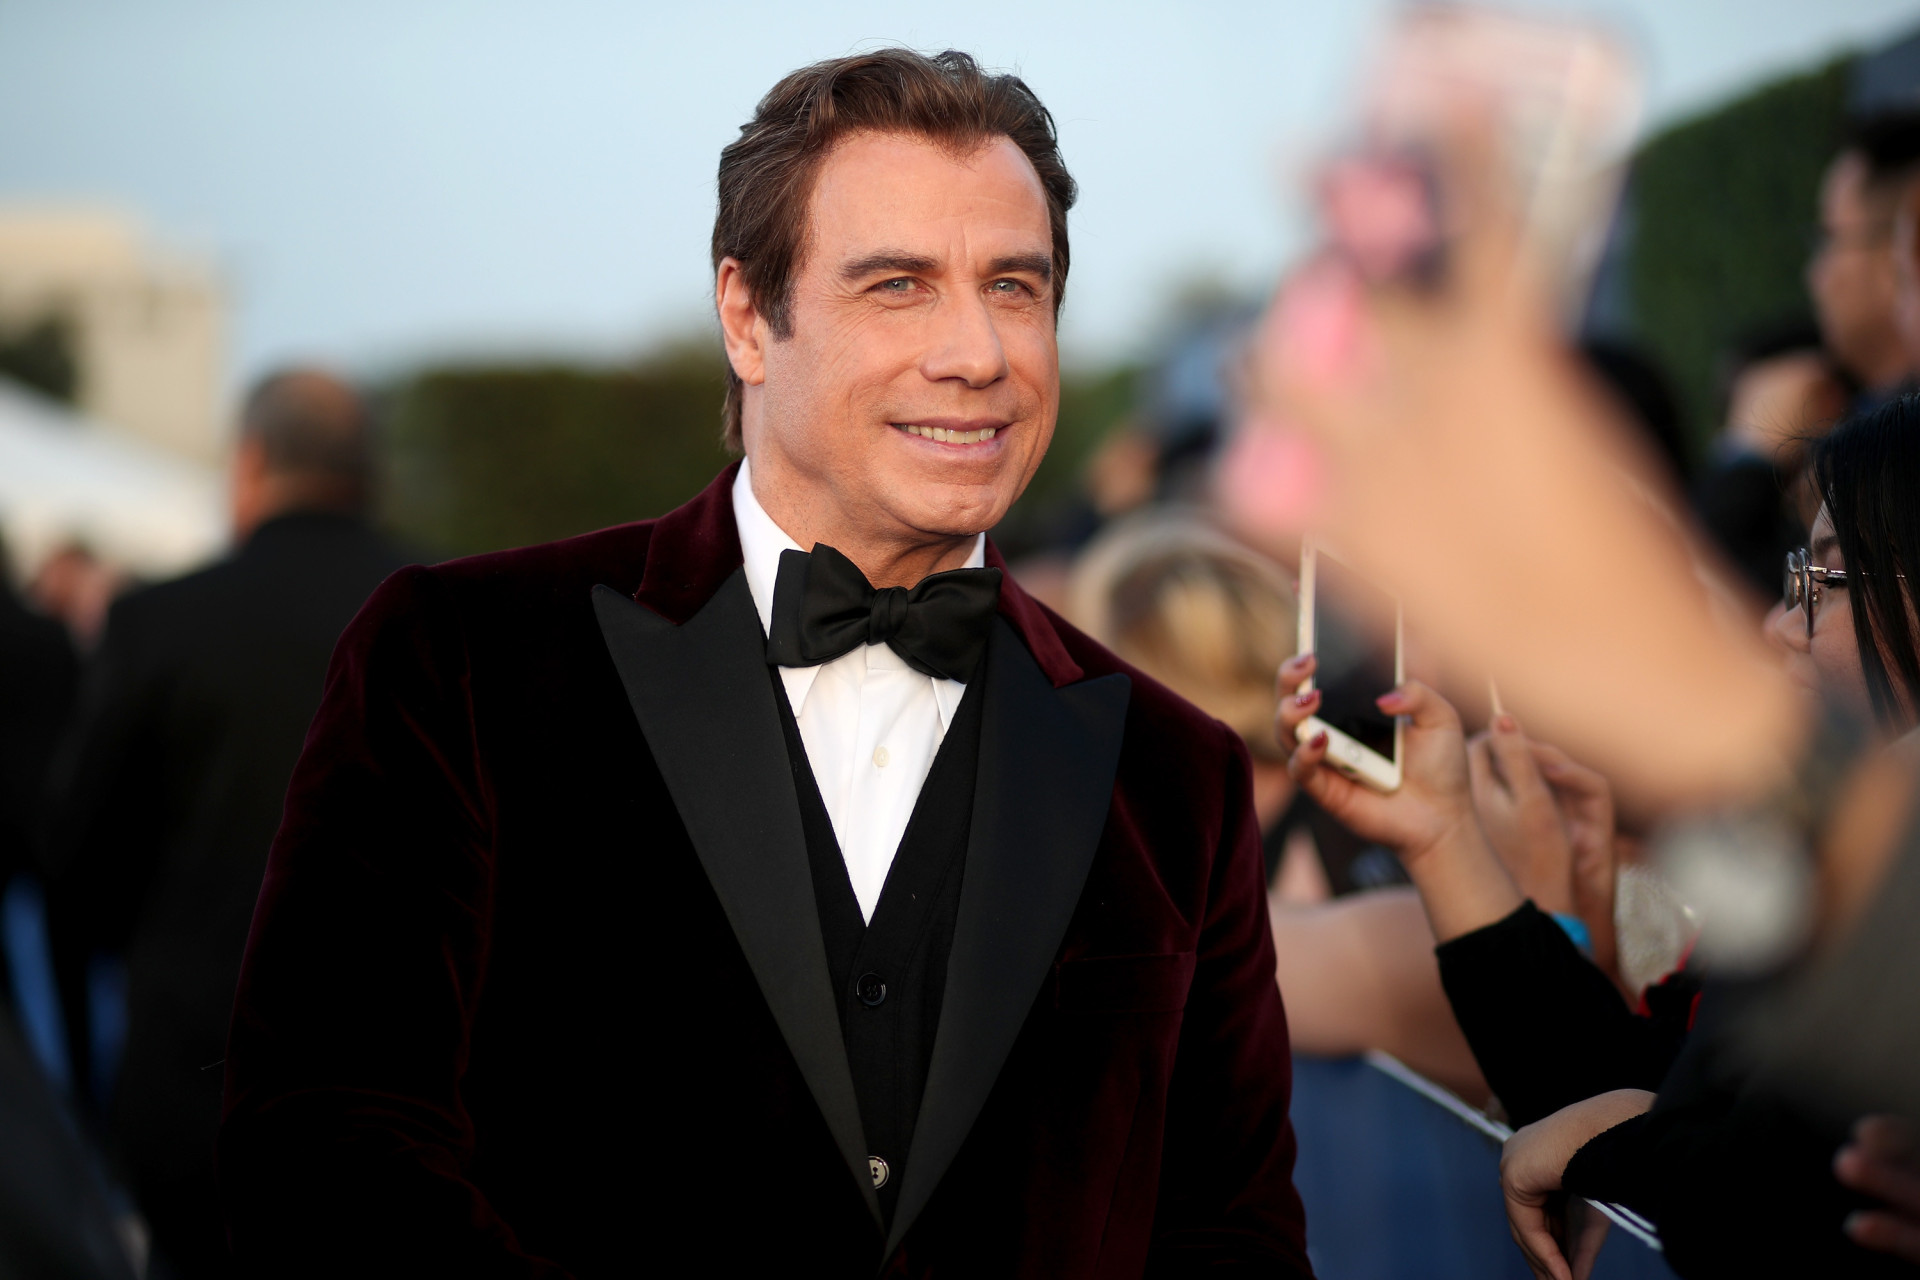 <p><span>Right there with Cruise, Travolta is one of the Church’s most highly prized members. </span></p><p><a href="https://www.msn.com/en-us/community/channel/vid-7xx8mnucu55yw63we9va2gwr7uihbxwc68fxqp25x6tg4ftibpra?cvid=94631541bc0f4f89bfd59158d696ad7e">Follow us and access great exclusive content every day</a></p>